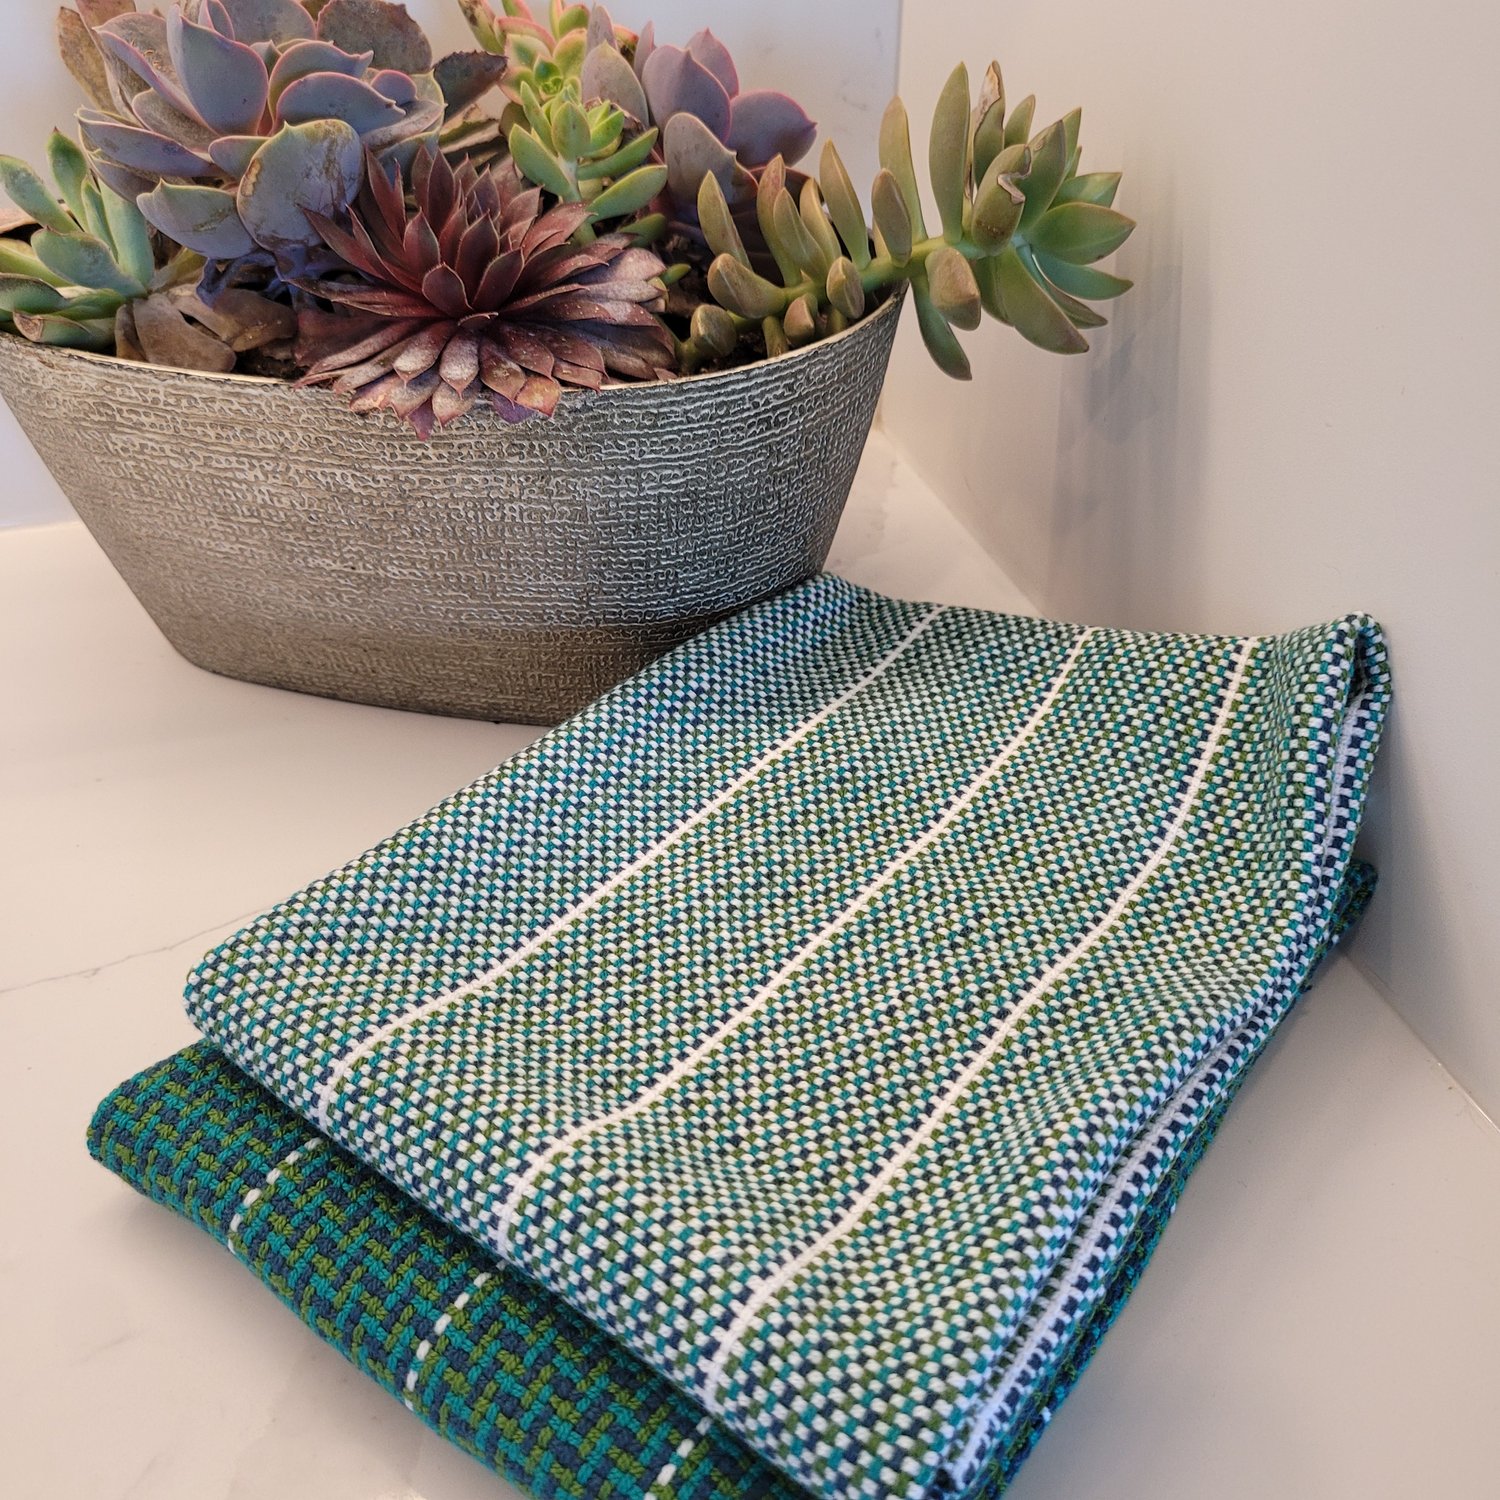 The Softest Towels Rigid Heddle Weaving Pattern — The Rogue Weaver